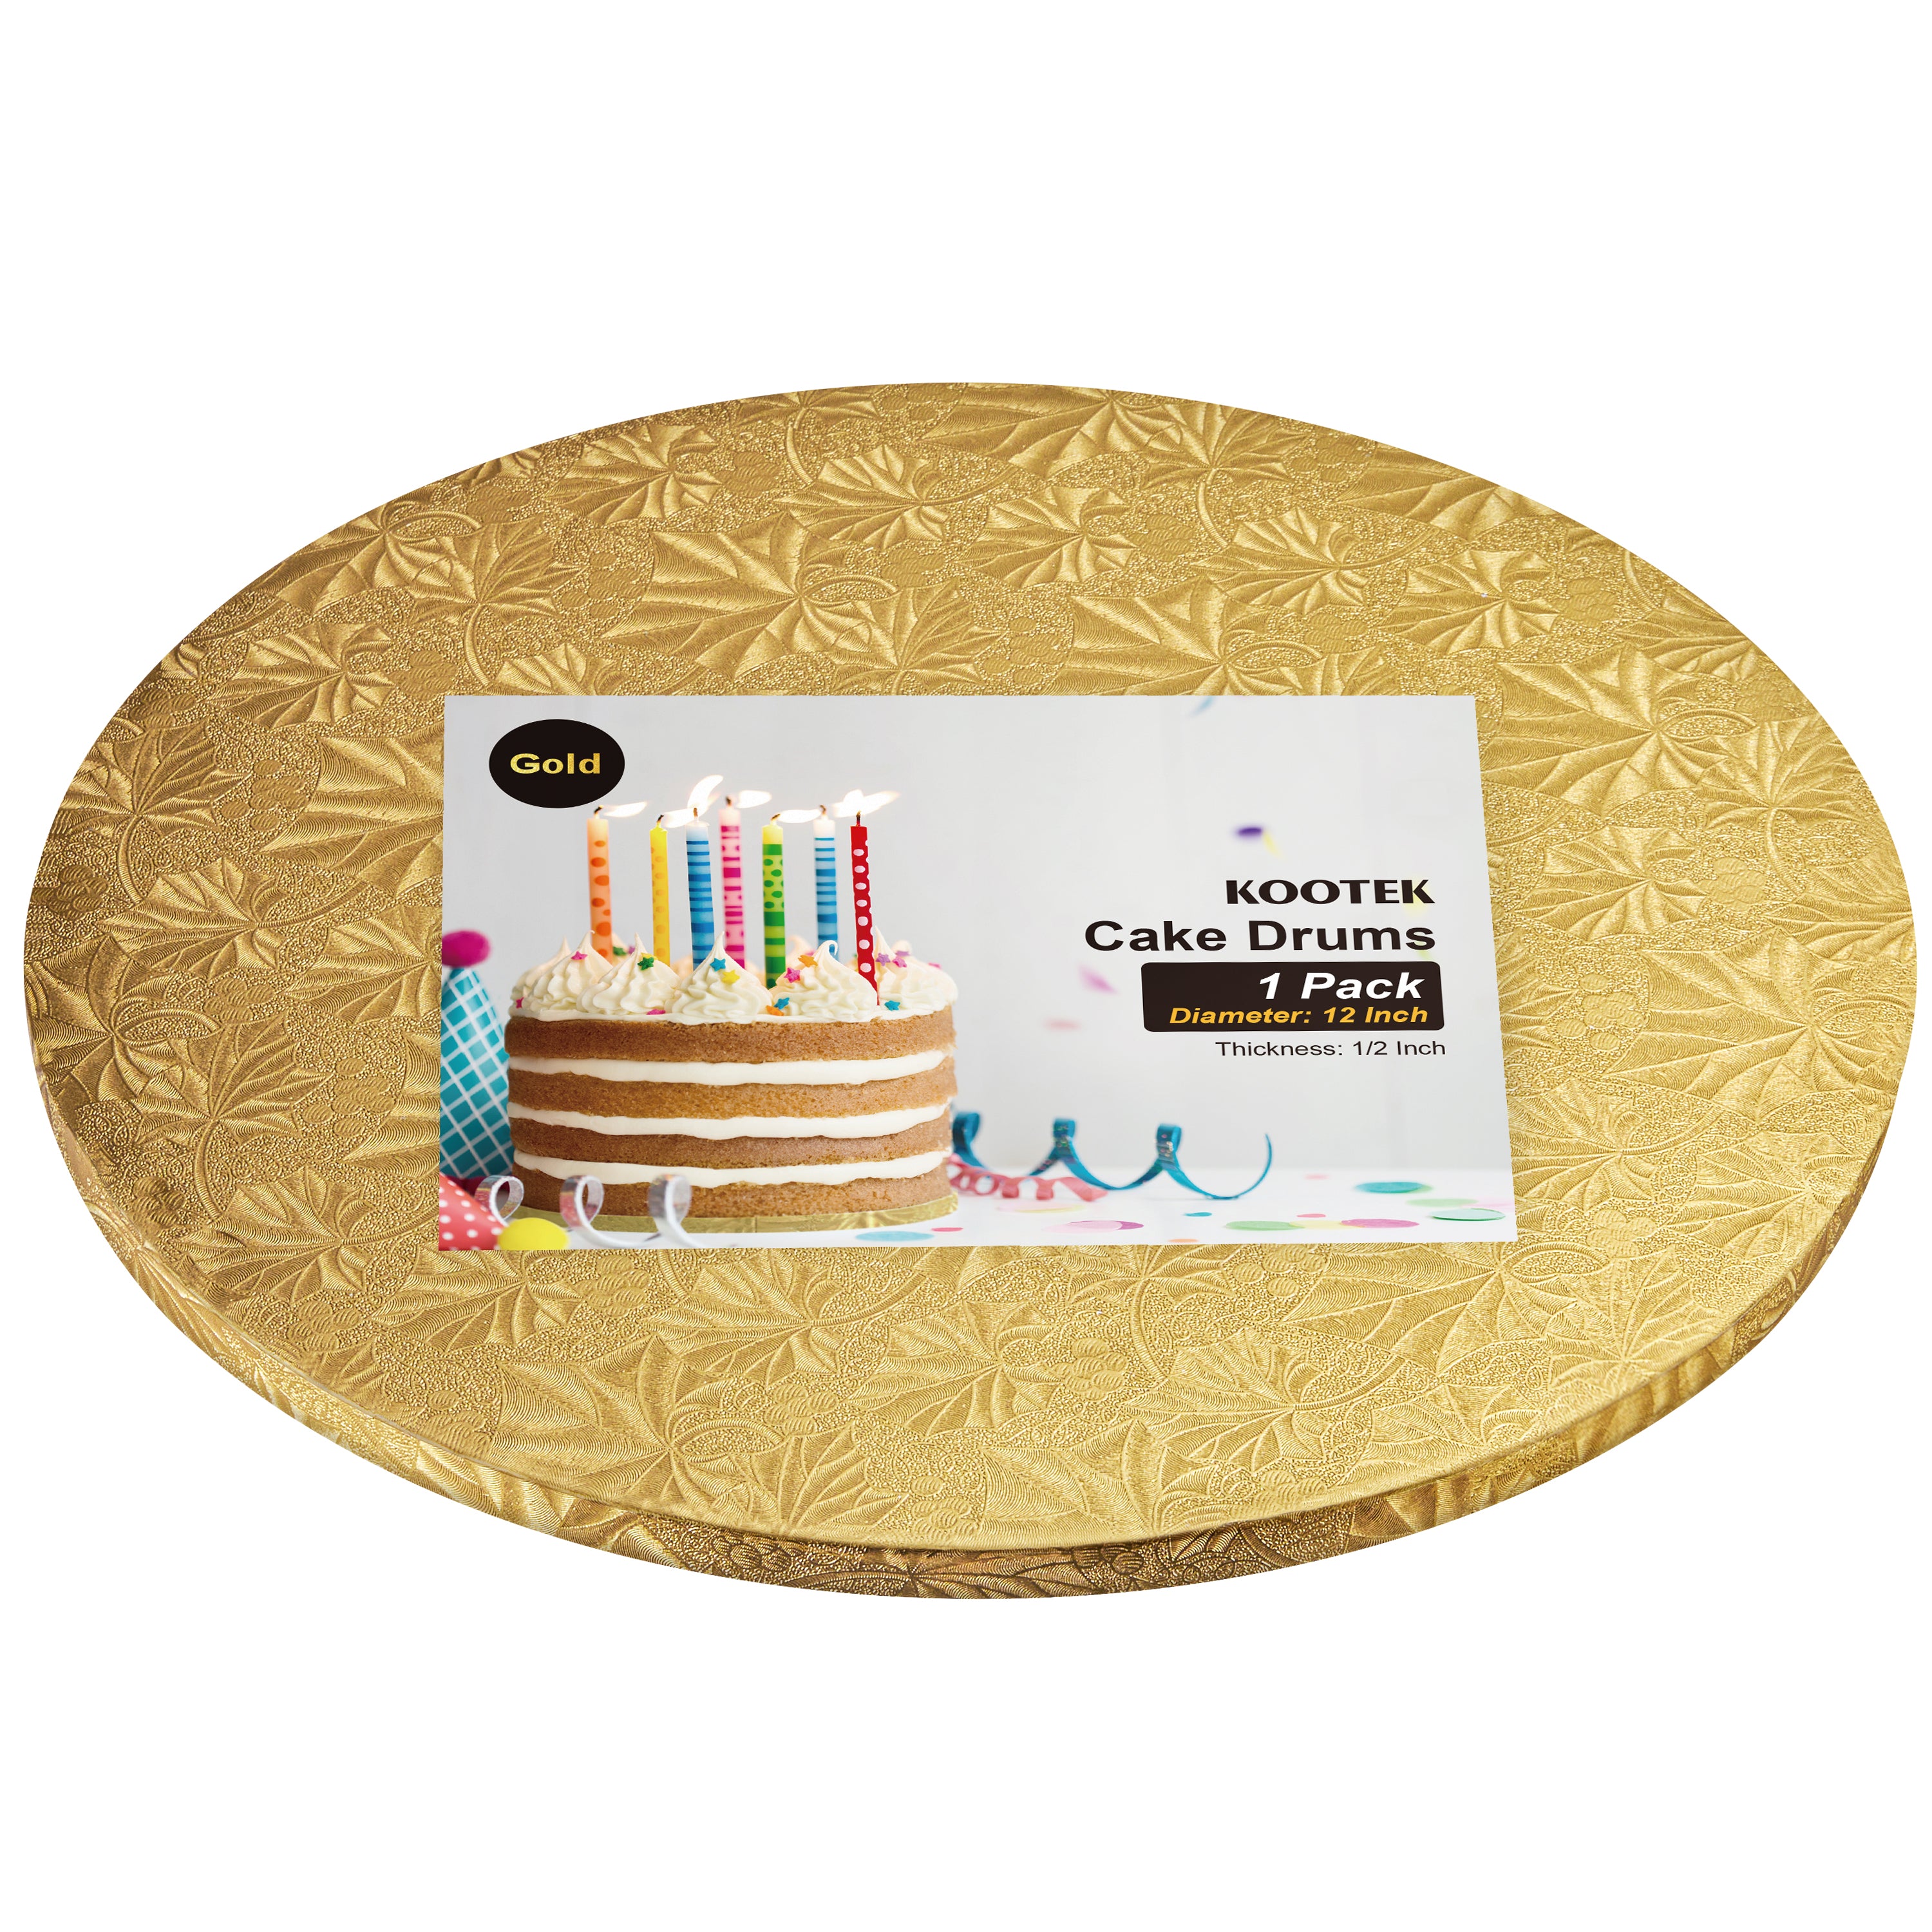 Kootek Cake Boards Drums 12 Inch Round, 1/2" Thick Cake Drums, Cake Decorating Supplies Sturdy Cake Corrugated Cardboard for Multi-Layer Cakes (Gold, 1 Pack)